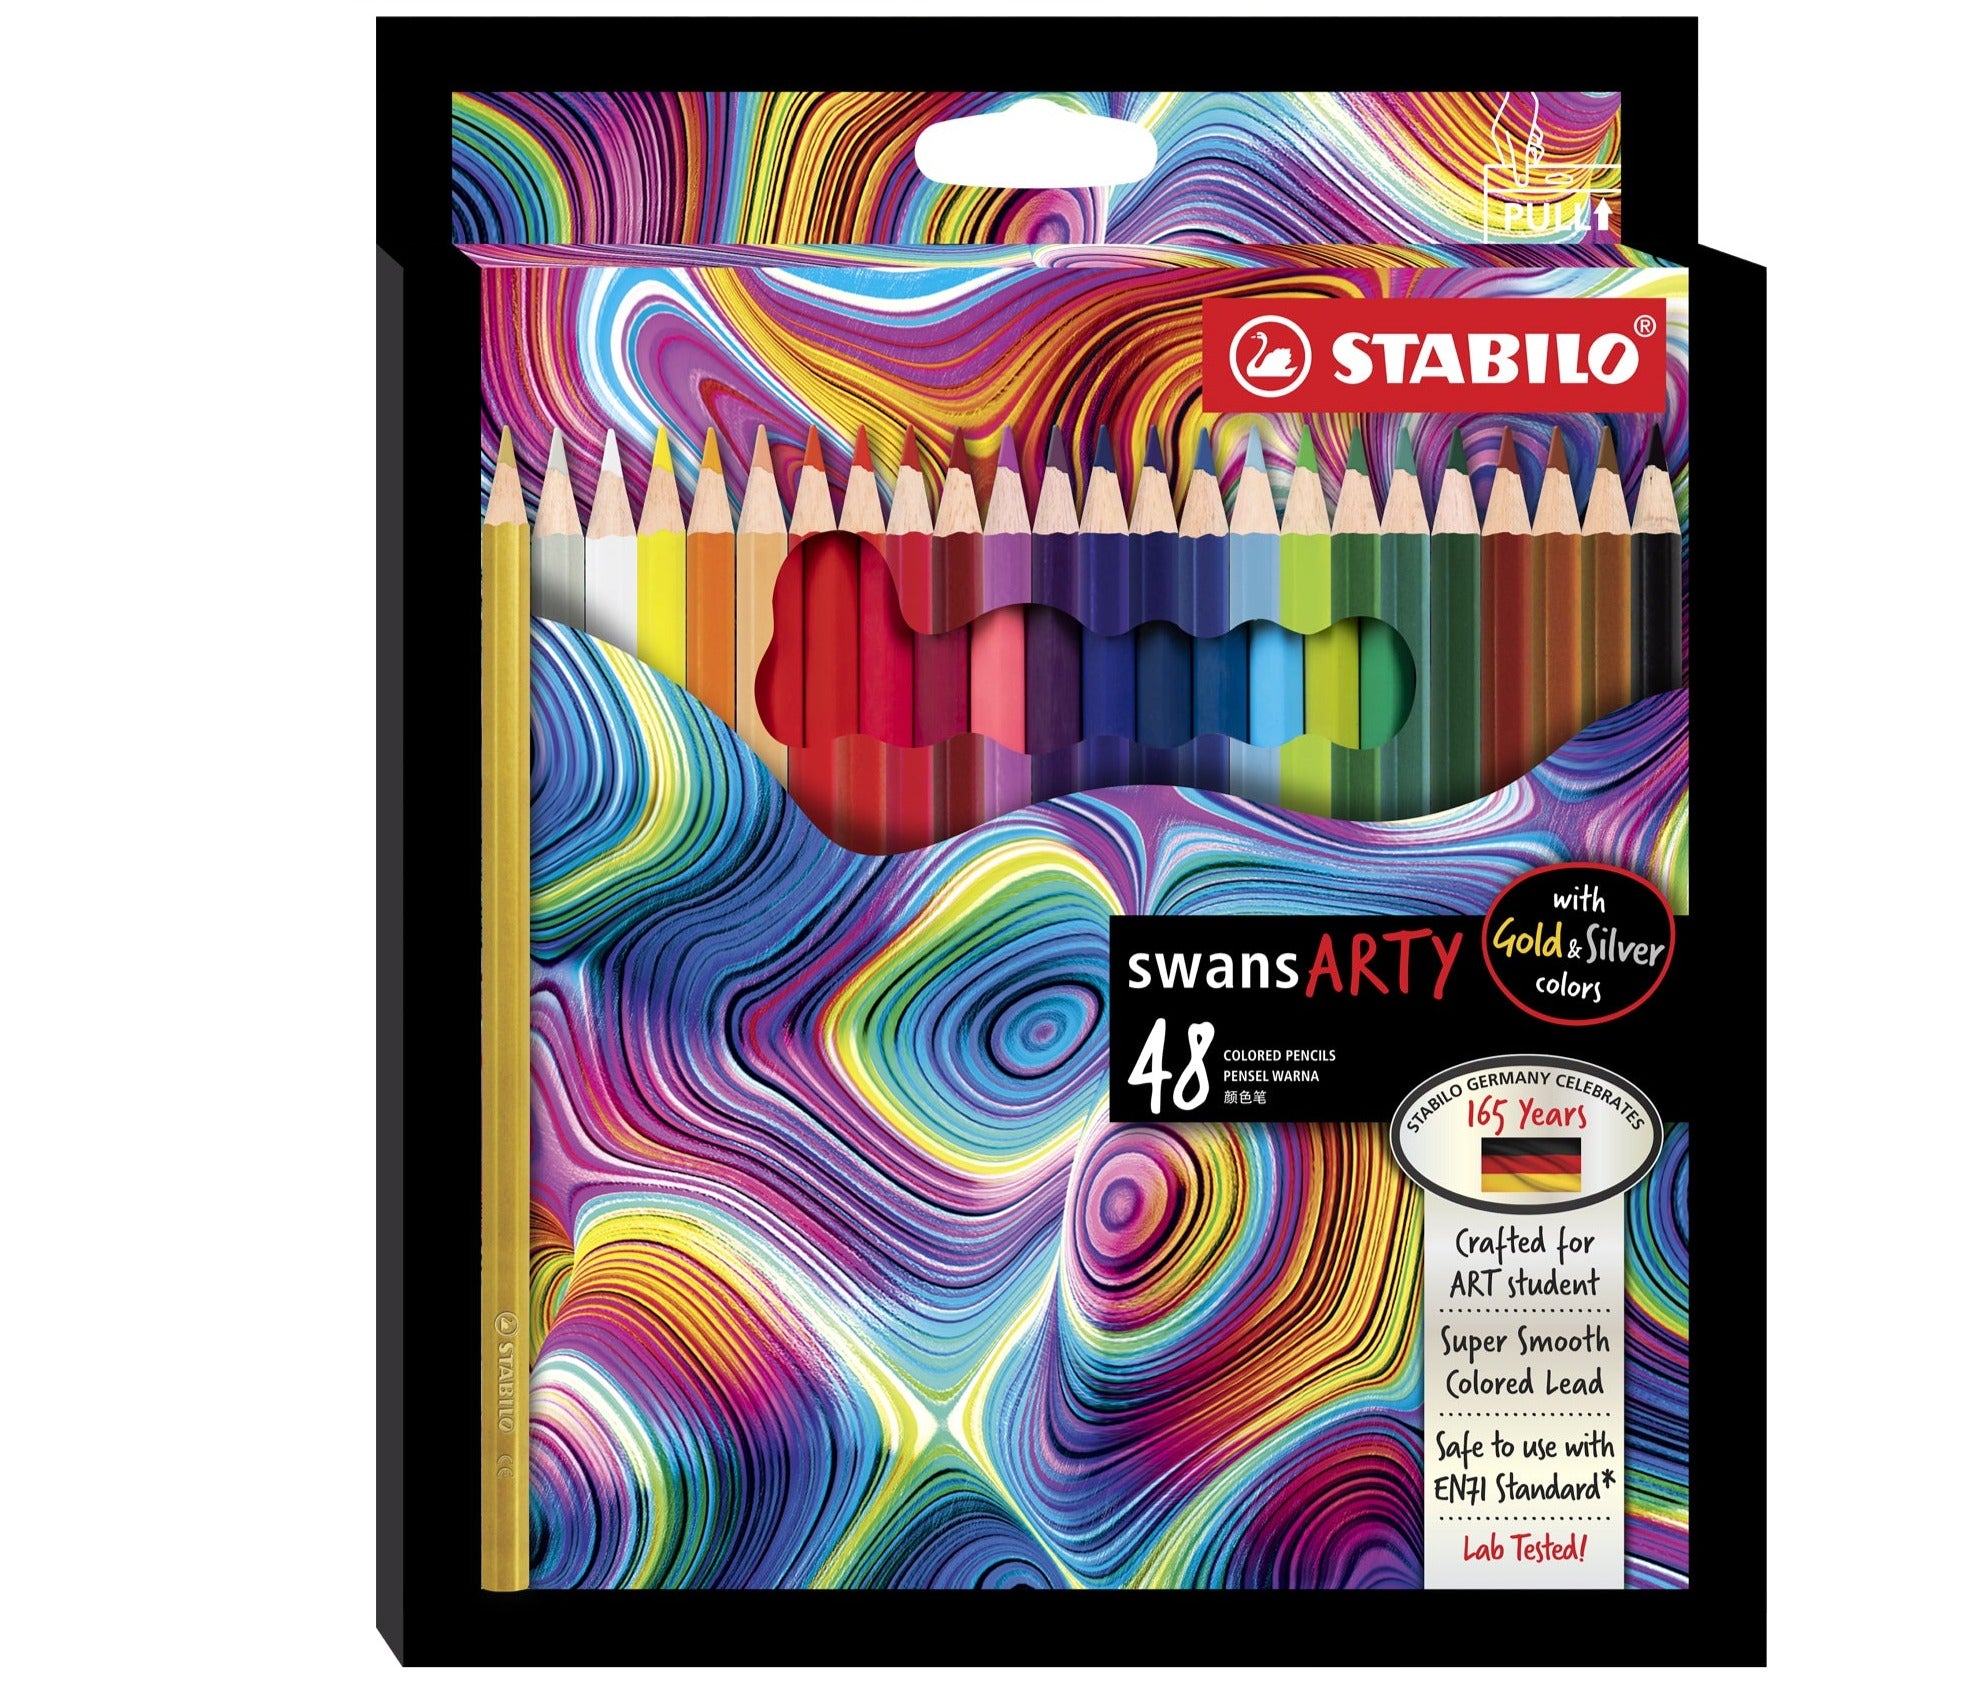 STABILO swans ARTY Coloured Pencils with Gold & Silver colors